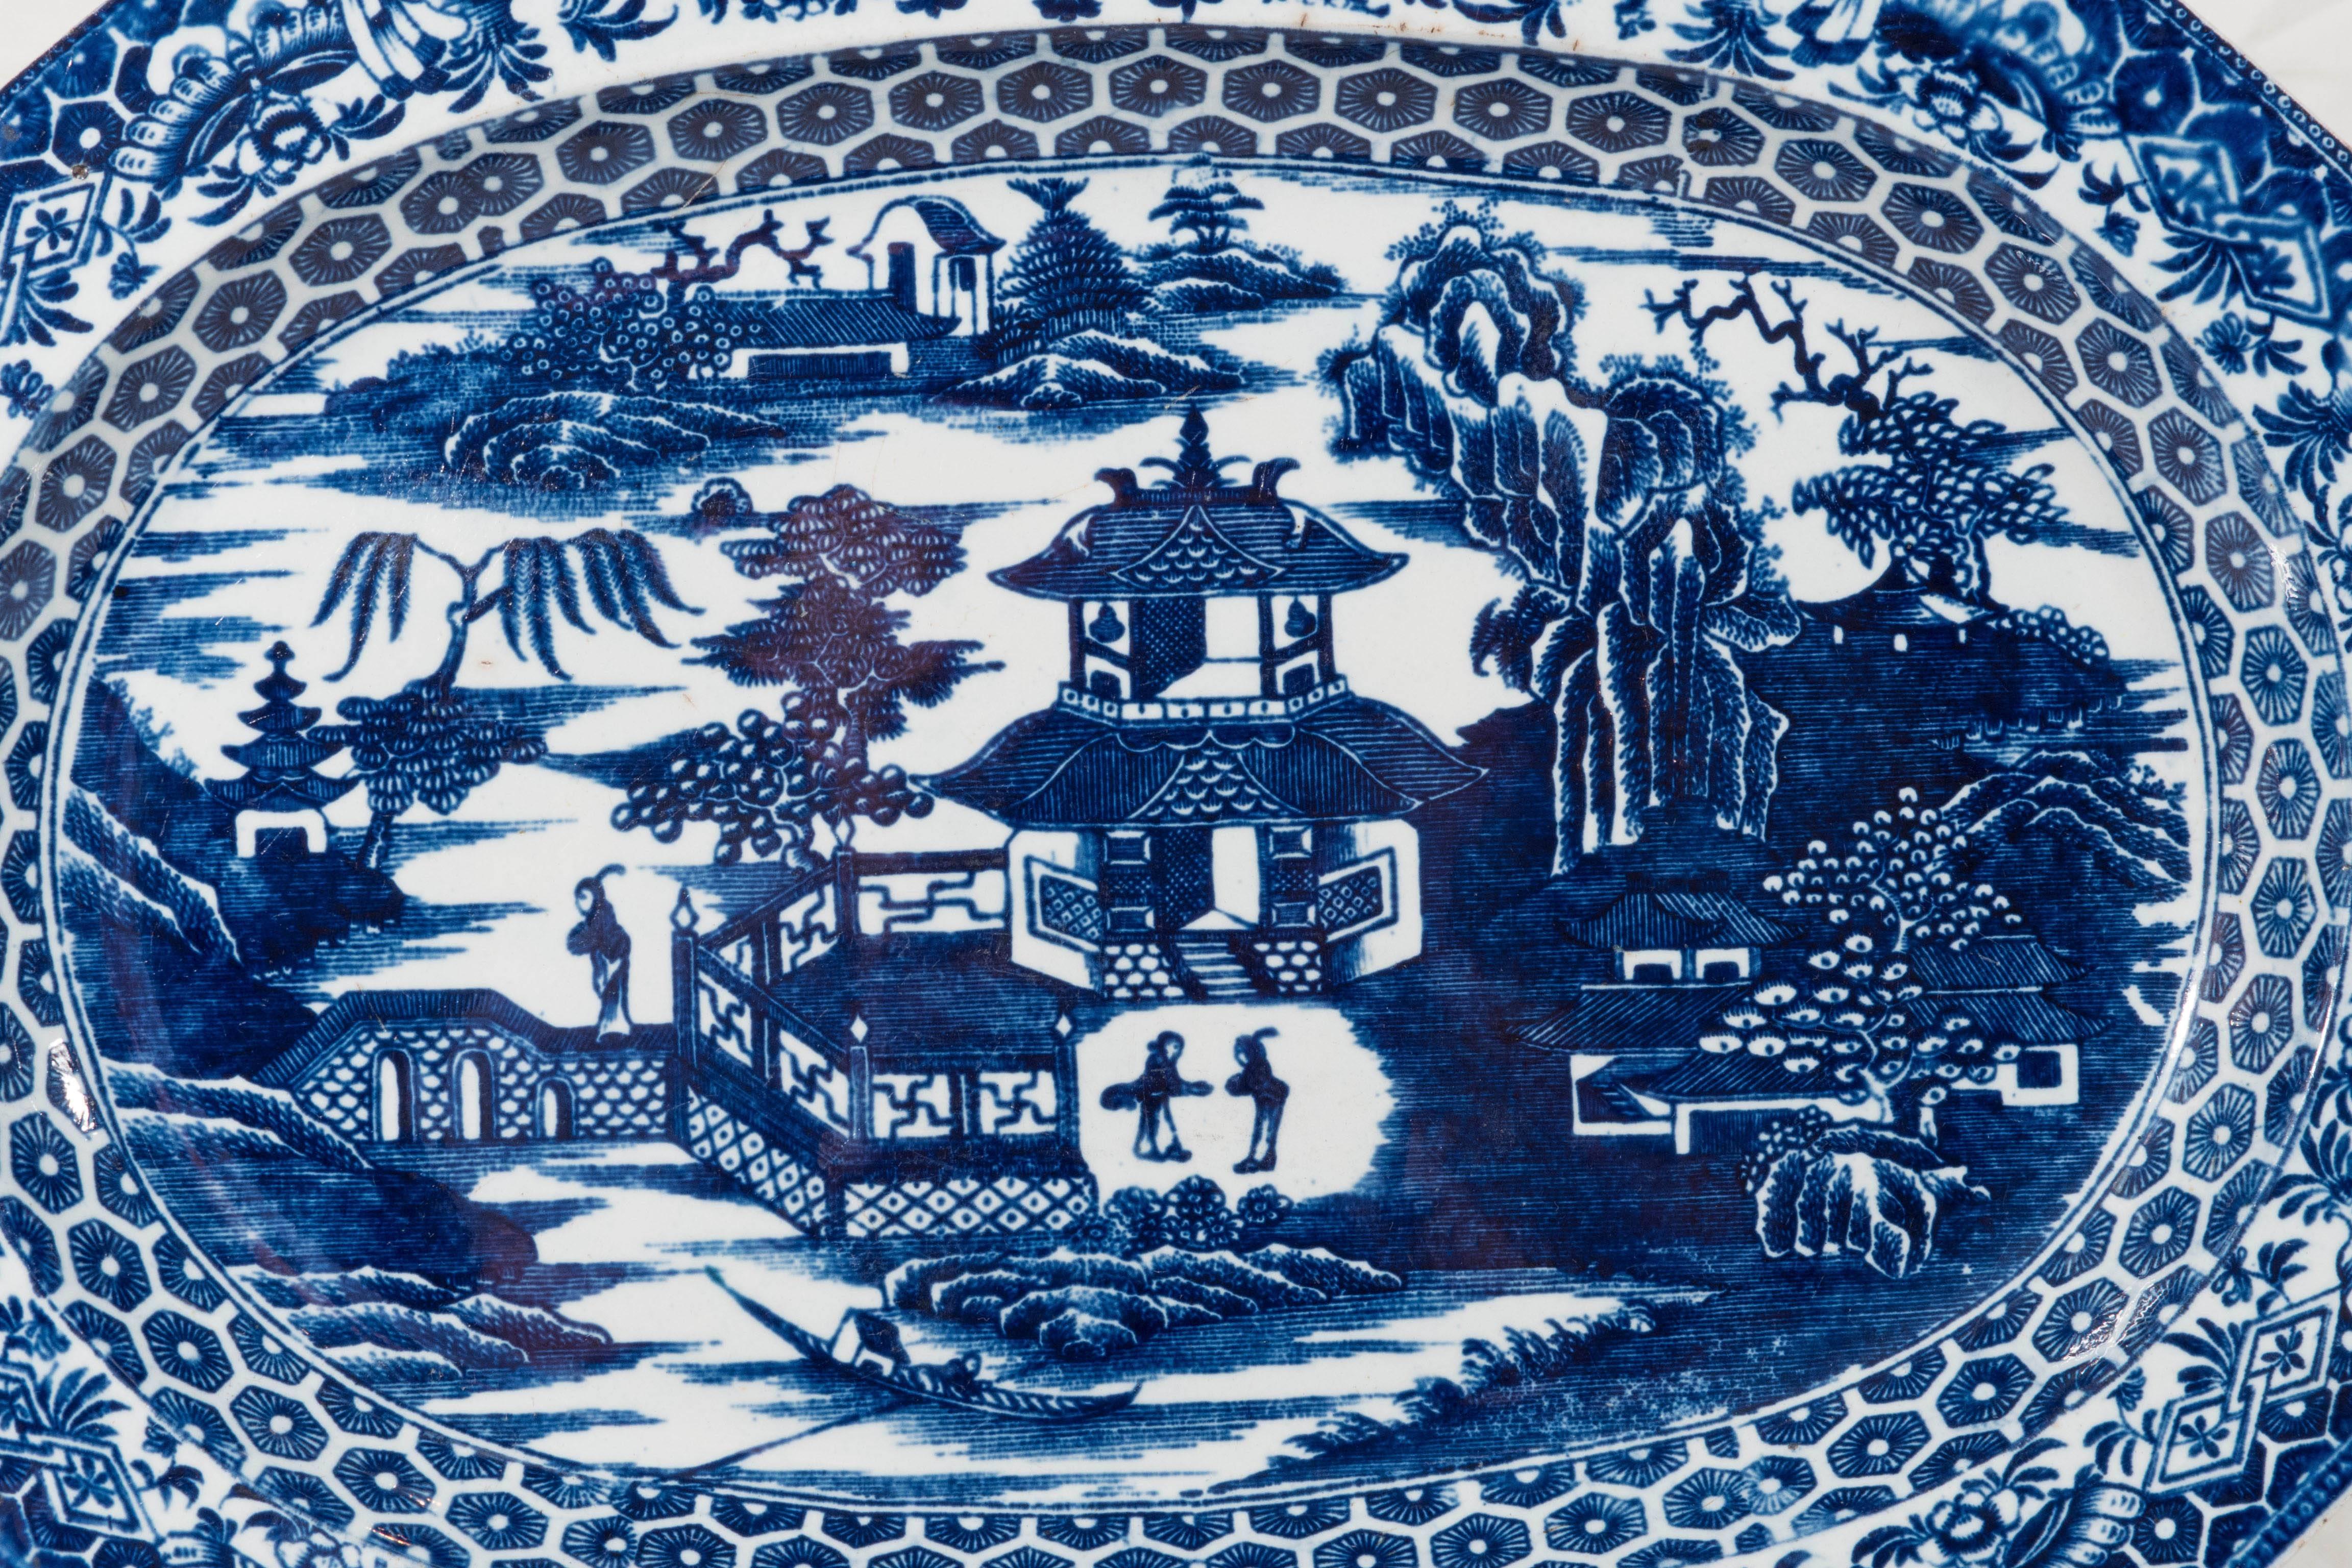 A lovely blue and white platter made by J Heath at the end of the 18th century. The pattern is a variation on the well known 